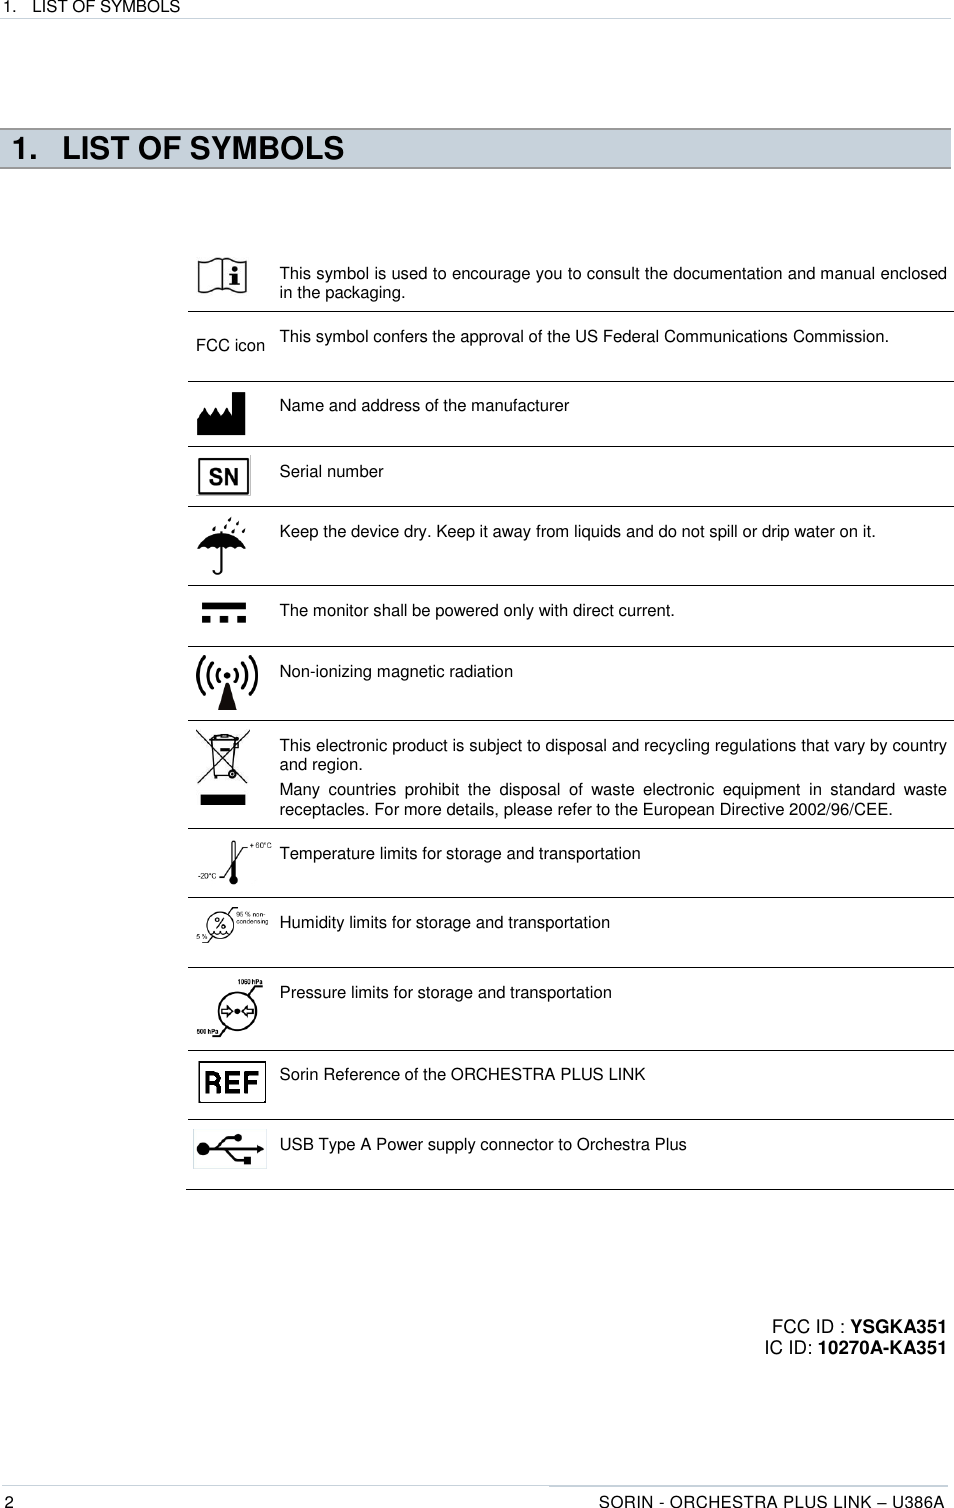 1.  LIST OF SYMBOLS  2 SORIN - ORCHESTRA PLUS LINK – U386A    1.  LIST OF SYMBOLS                                          FCC ID : YSGKA351 IC ID: 10270A-KA351    This symbol is used to encourage you to consult the documentation and manual enclosed in the packaging. FCC icon This symbol confers the approval of the US Federal Communications Commission.    Name and address of the manufacturer  Serial number     Keep the device dry. Keep it away from liquids and do not spill or drip water on it.  The monitor shall be powered only with direct current.  Non-ionizing magnetic radiation   This electronic product is subject to disposal and recycling regulations that vary by country and region. Many  countries  prohibit  the  disposal  of  waste  electronic  equipment  in  standard  waste receptacles. For more details, please refer to the European Directive 2002/96/CEE.   Temperature limits for storage and transportation   Humidity limits for storage and transportation   Pressure limits for storage and transportation   Sorin Reference of the ORCHESTRA PLUS LINK  USB Type A Power supply connector to Orchestra Plus  